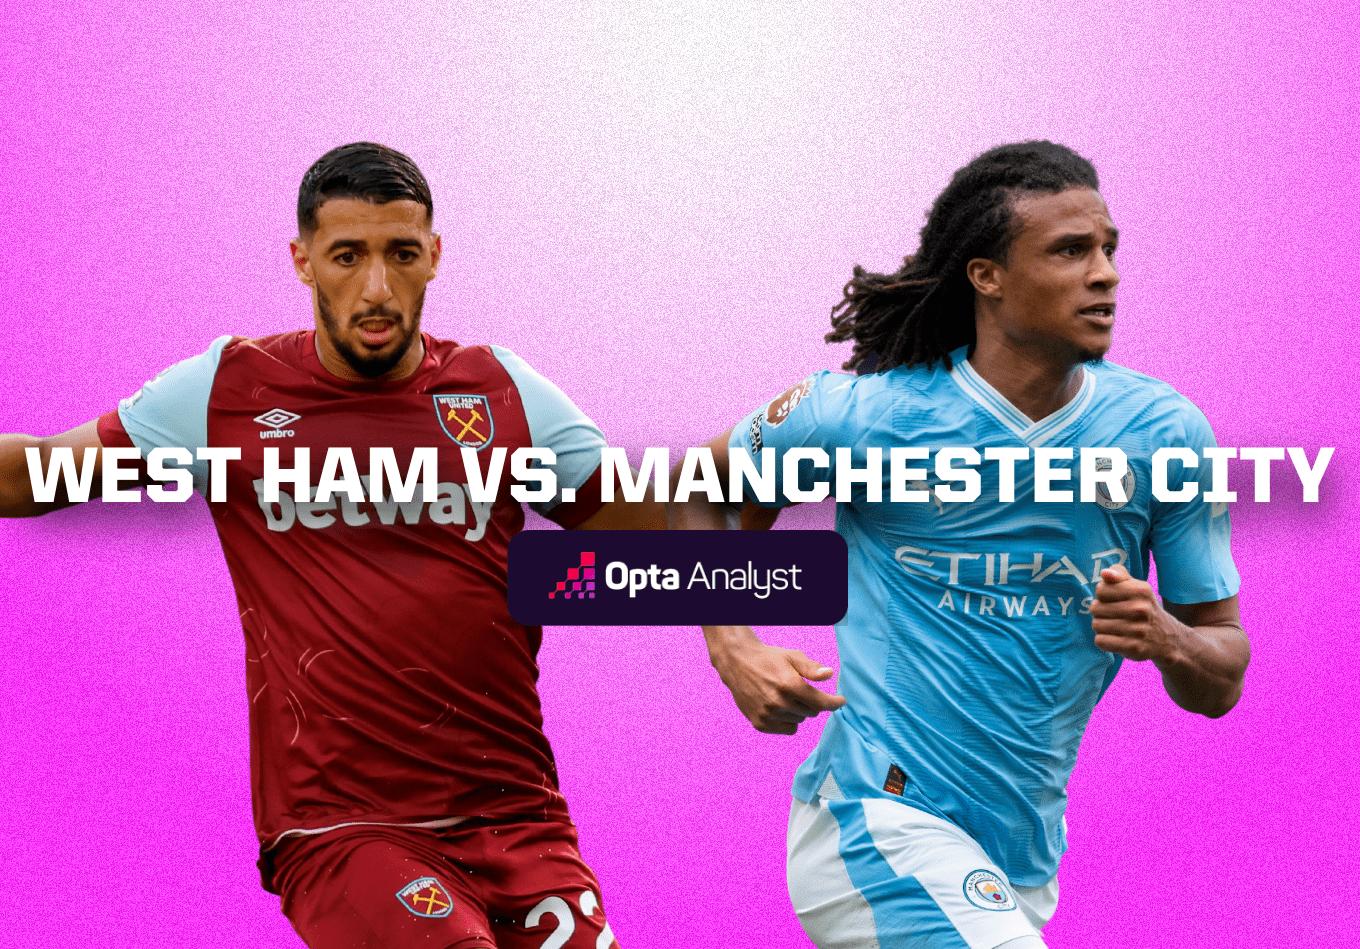 West Ham vs Manchester City: Prediction and Preview